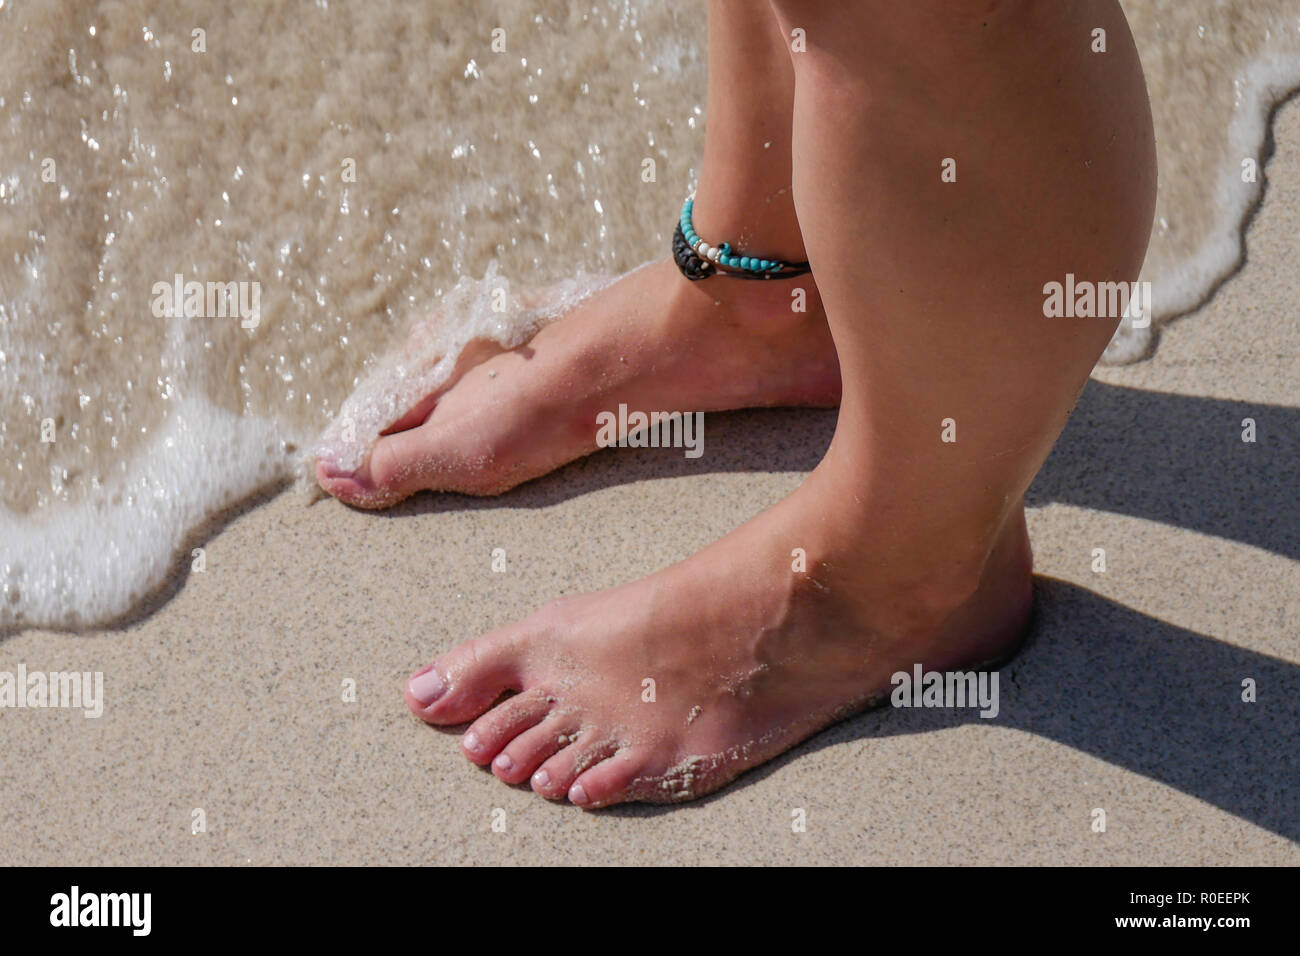 Barefooted woman on the beach waiting for the waves. Stock Photo